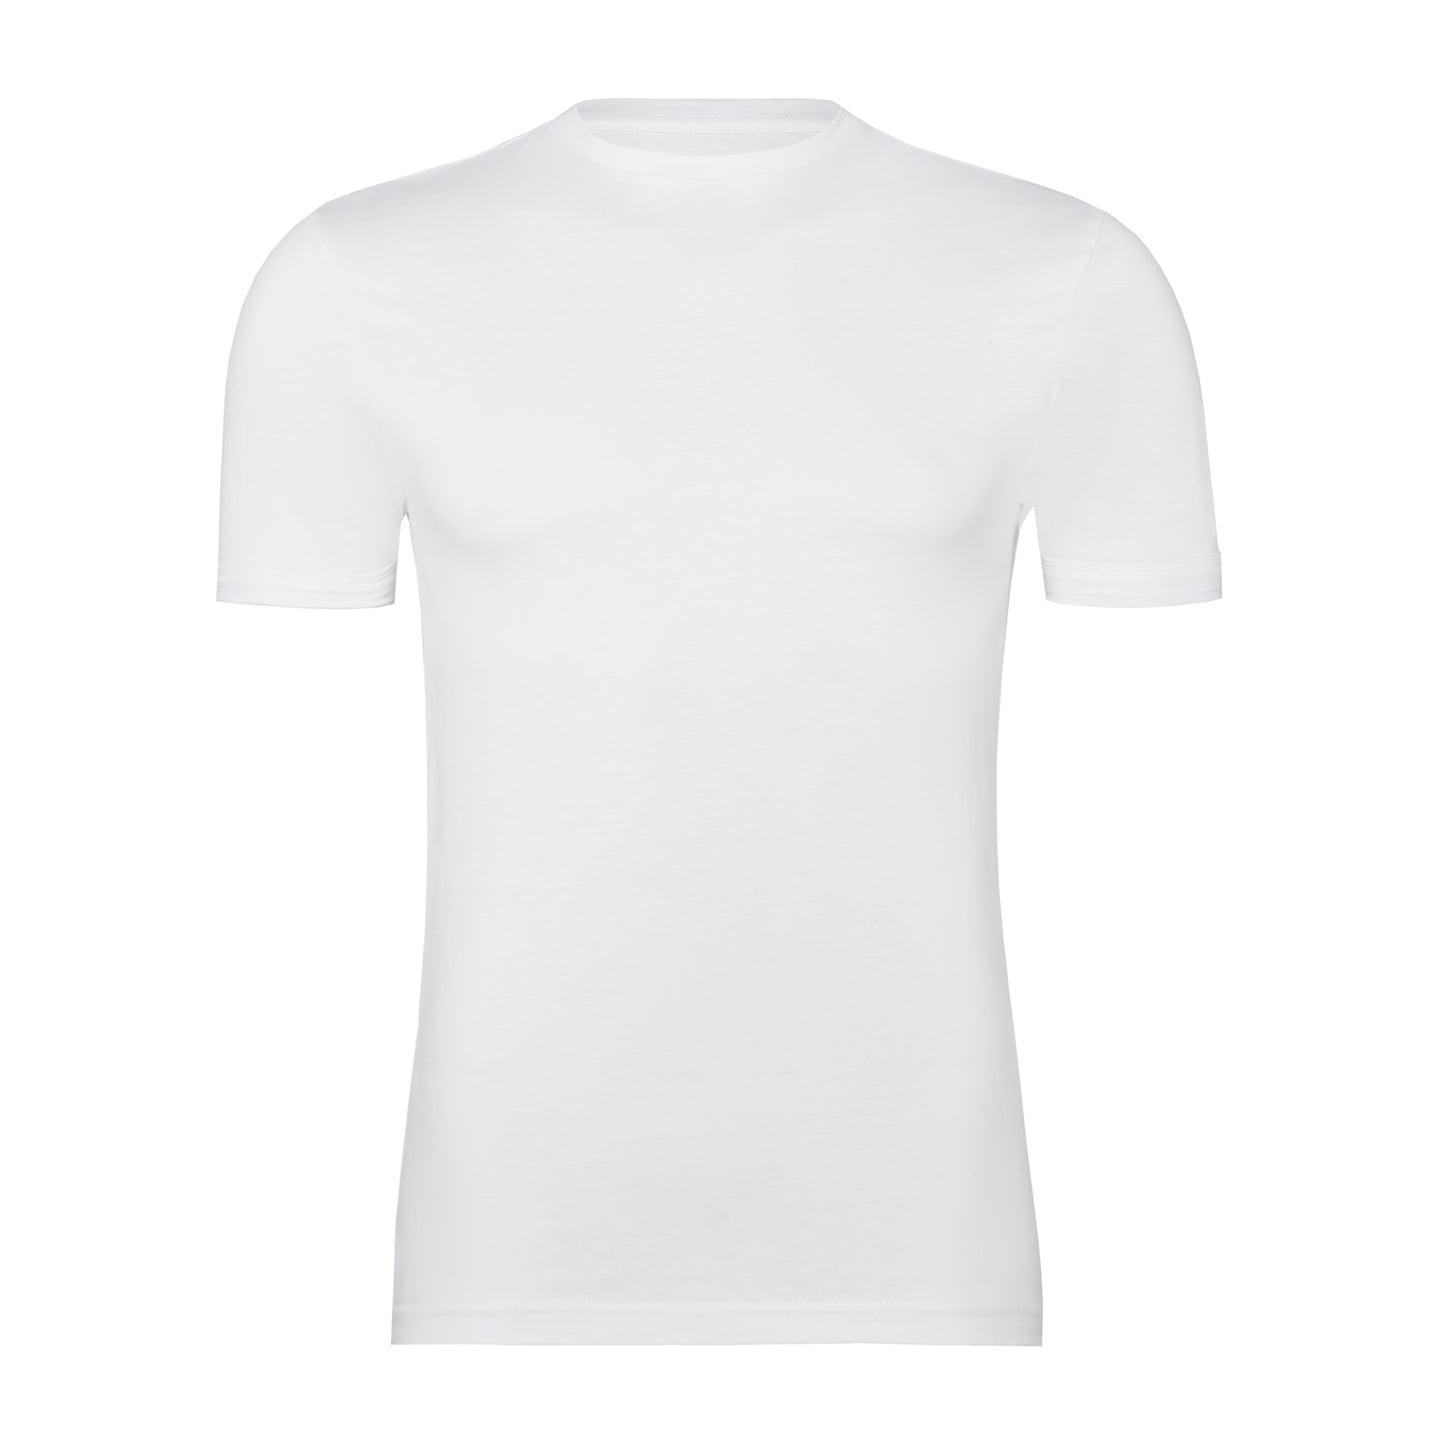 Round tight neck, white, slim fit, T-shirt – pack of 2 or 4 tees